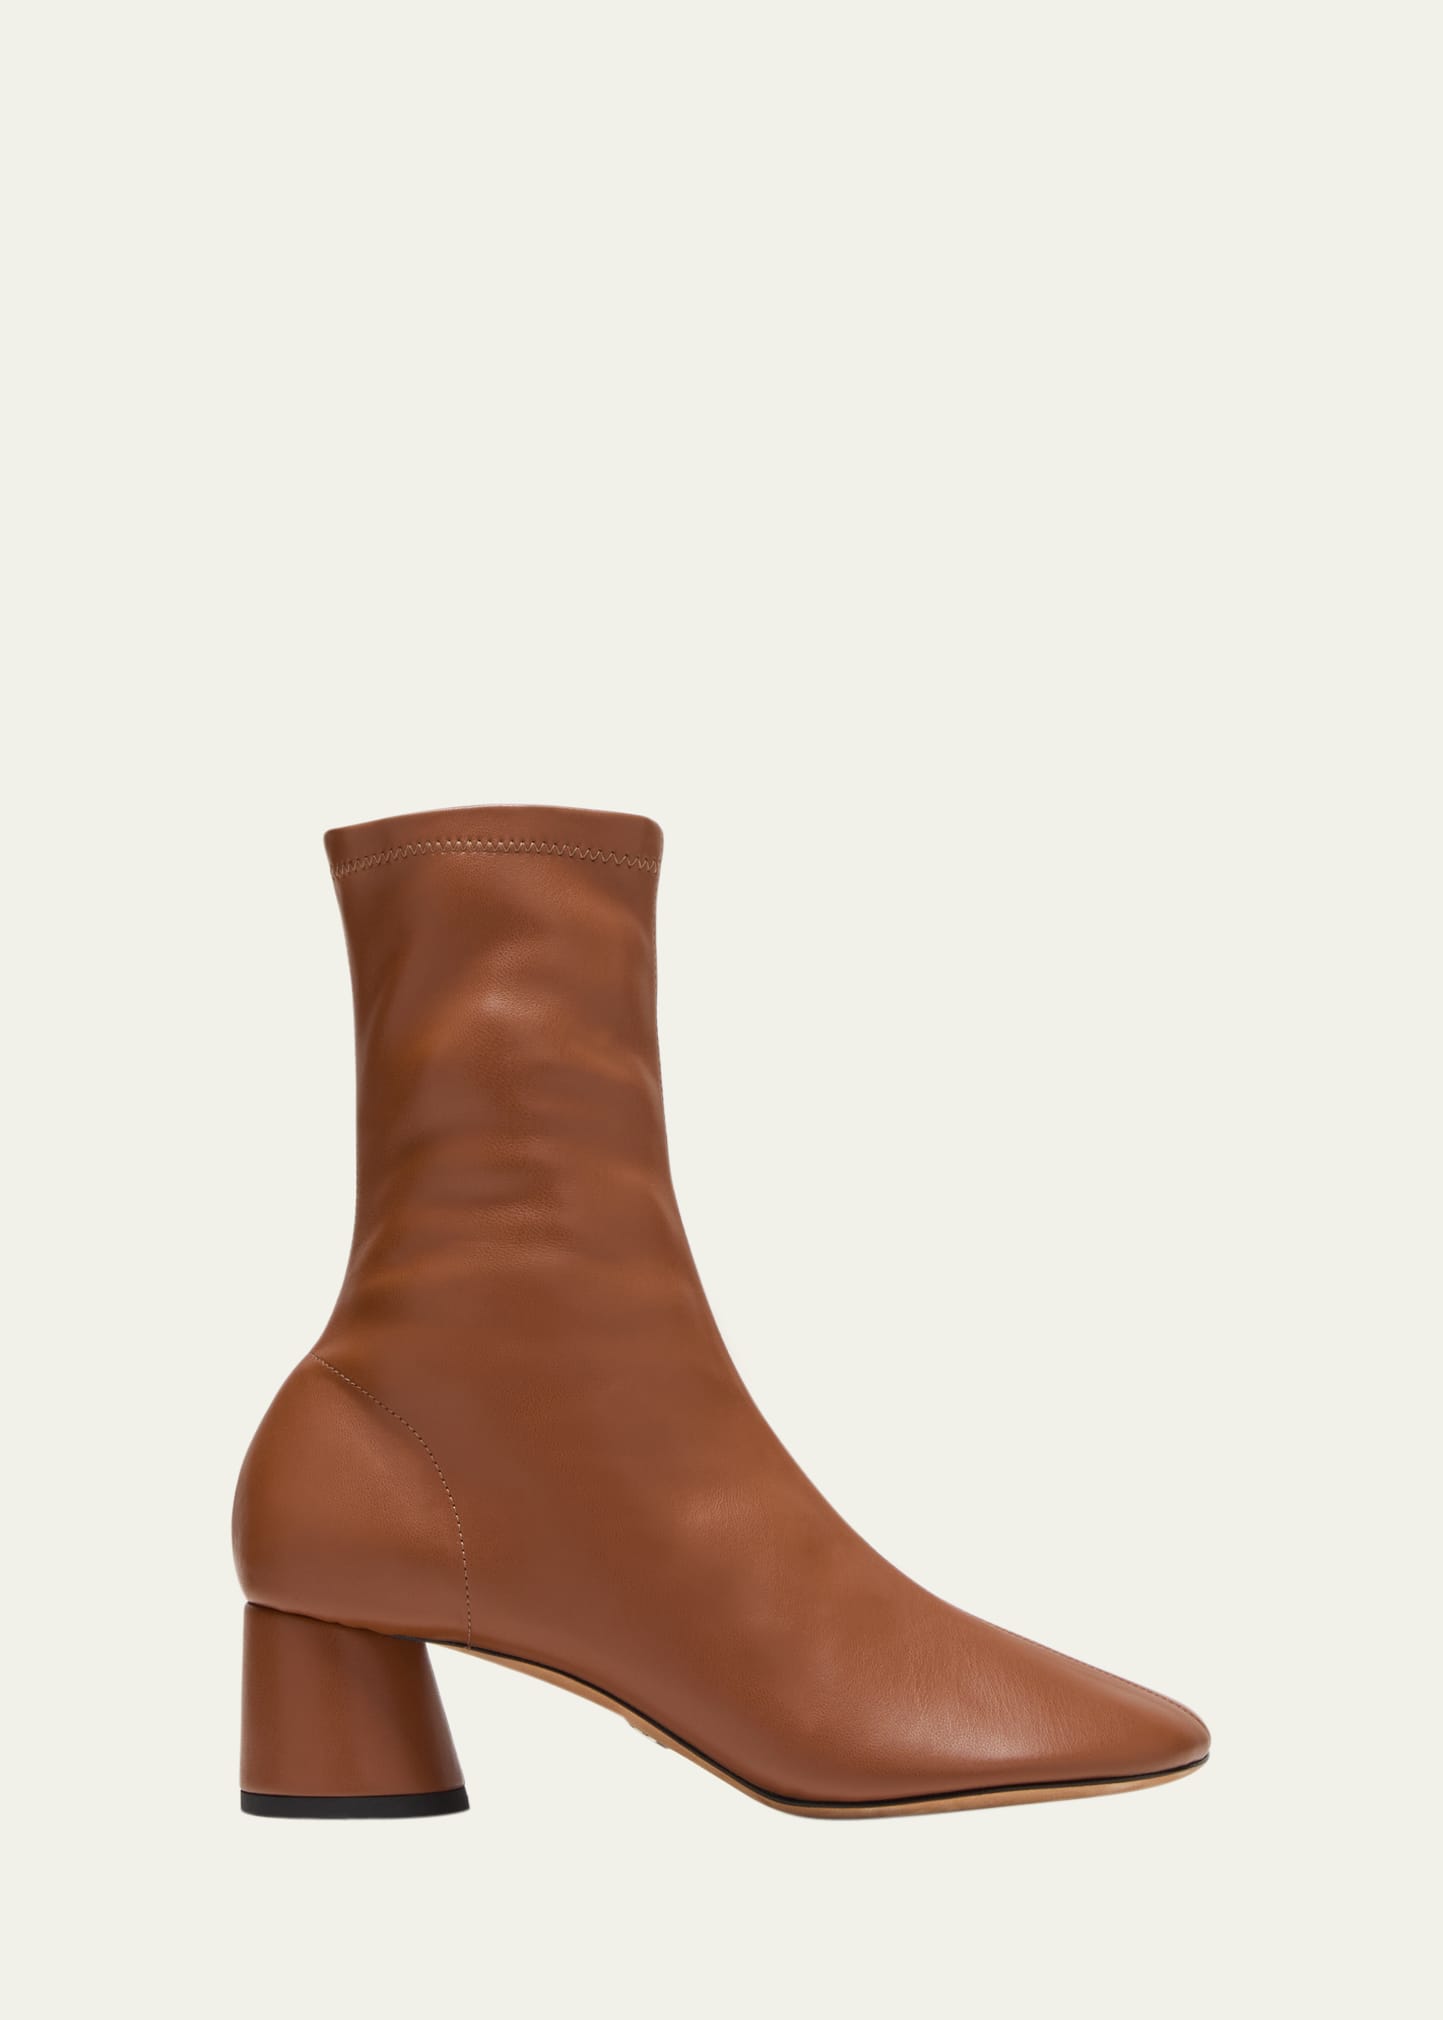 PROENZA SCHOULER GLOVE STRETCH CYLINDER-HEEL ANKLE BOOTS